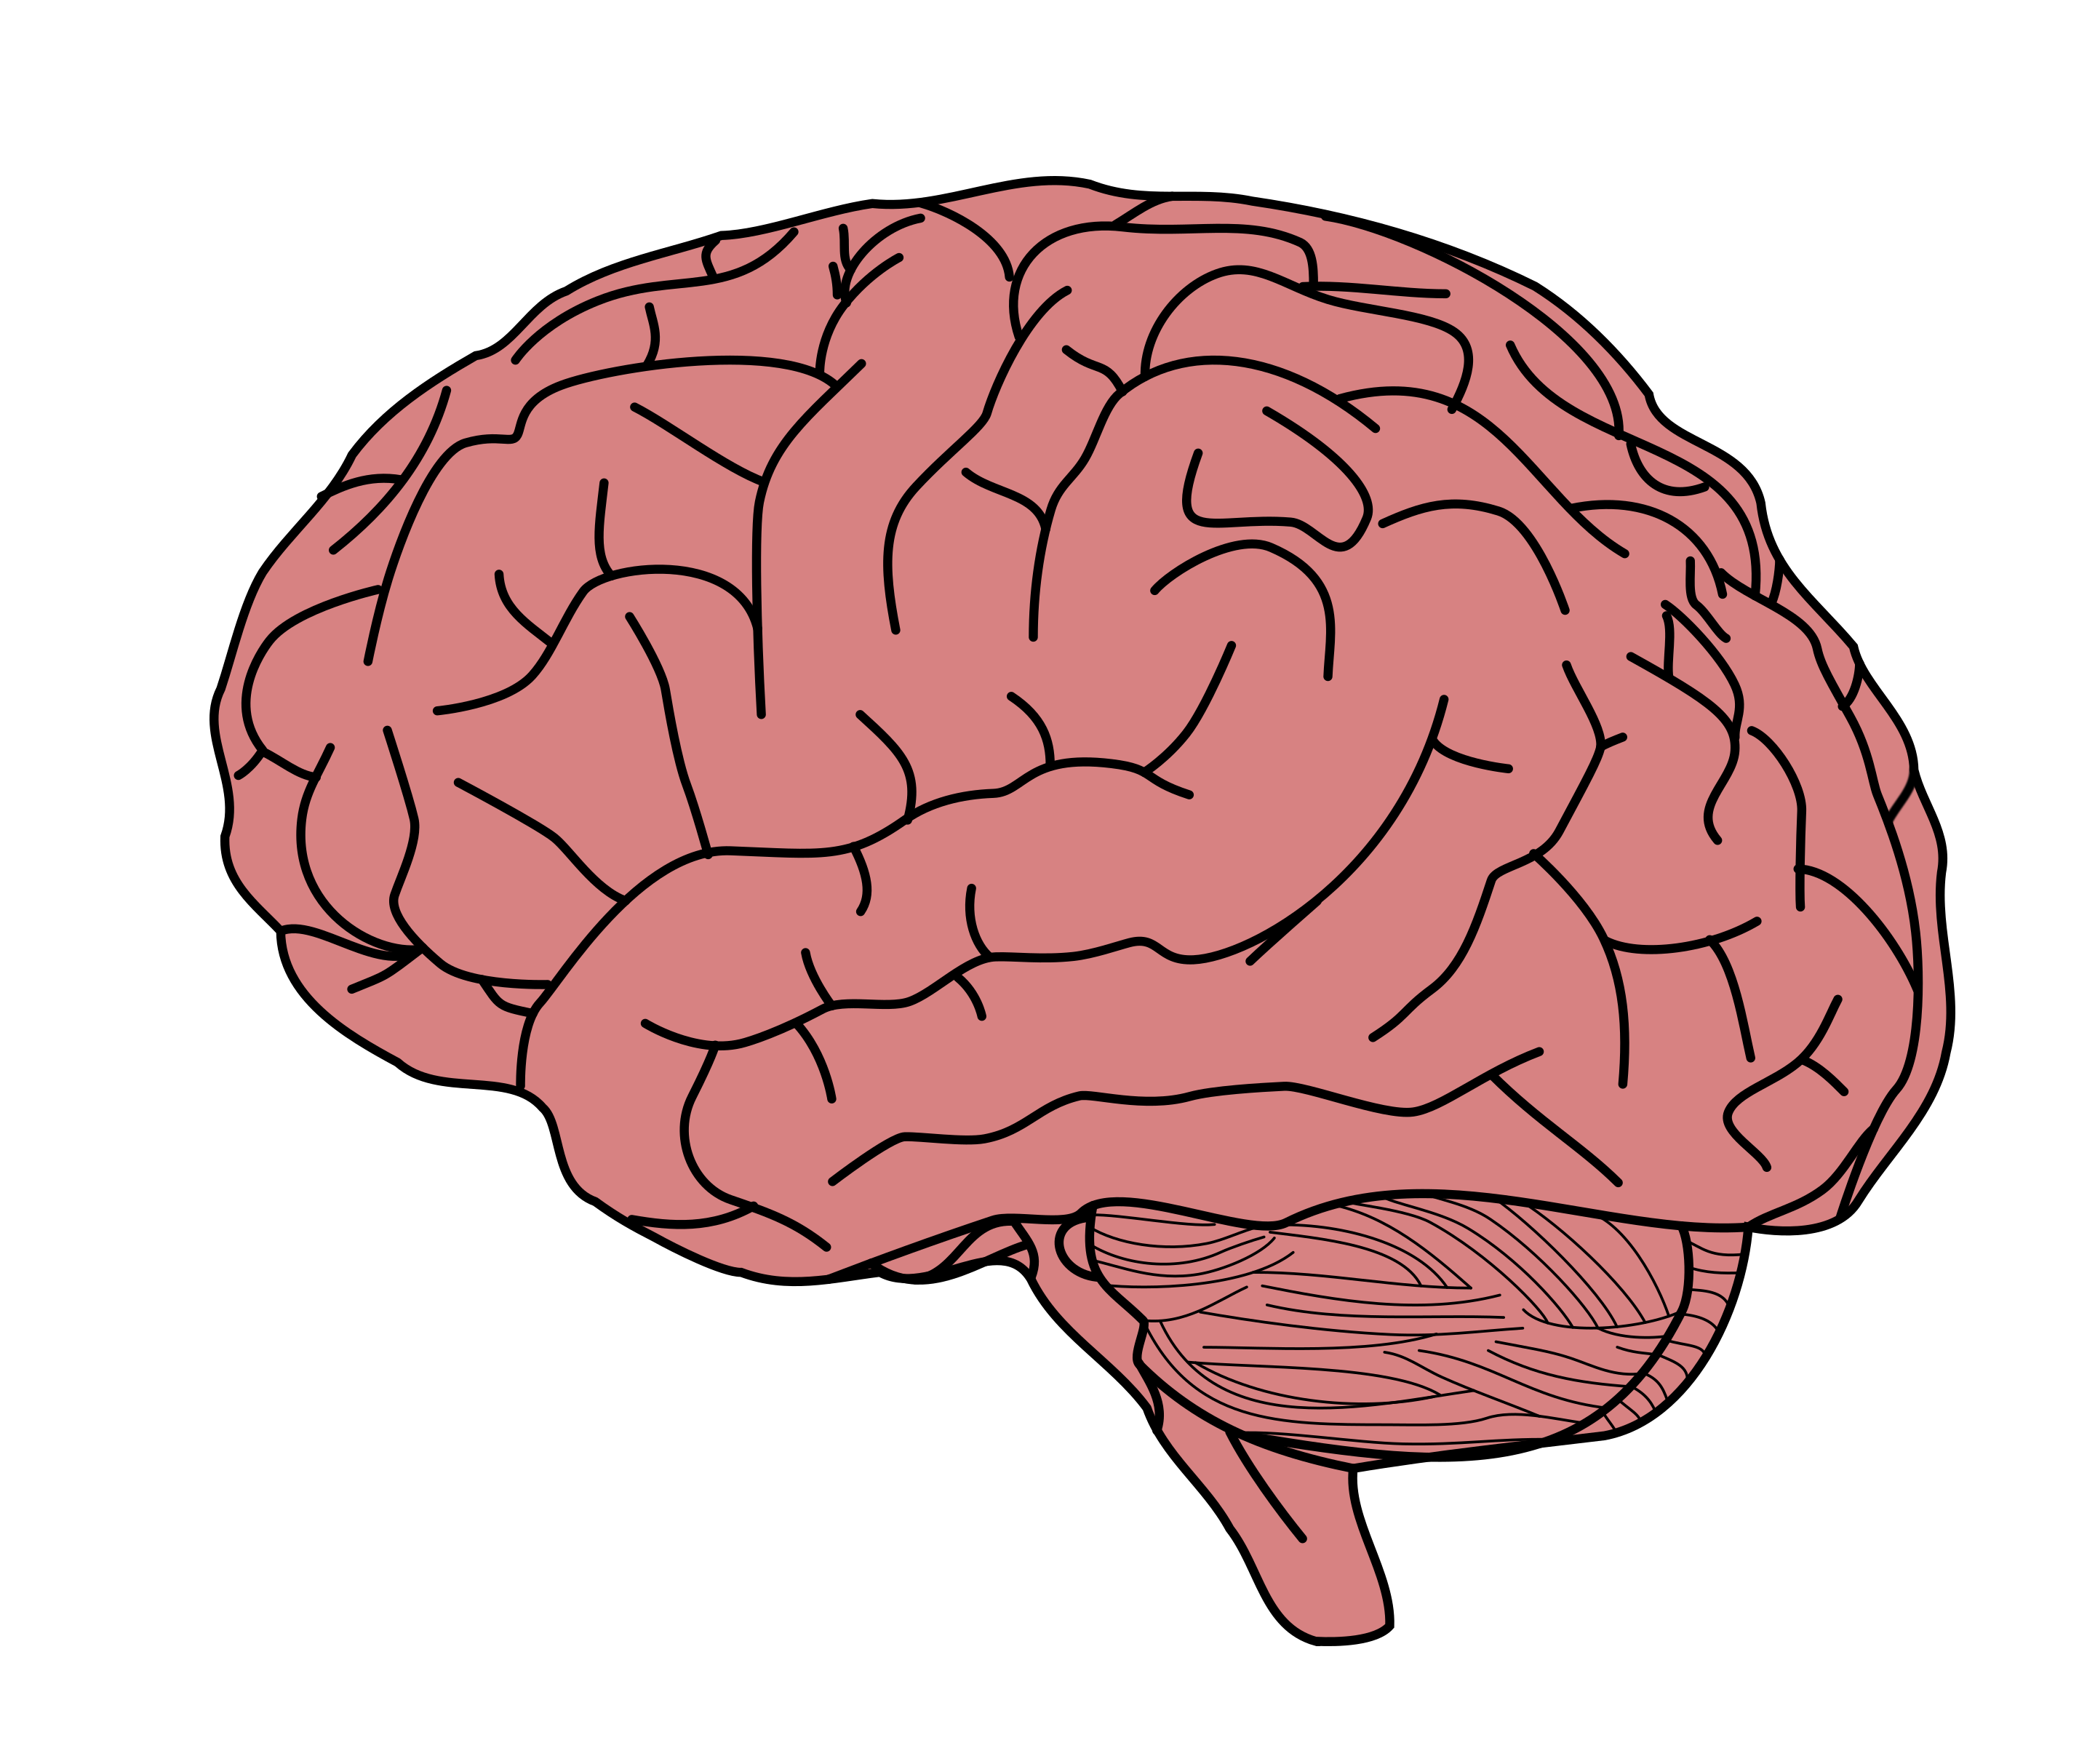 Red Brain PNG HD Images pngteam.com